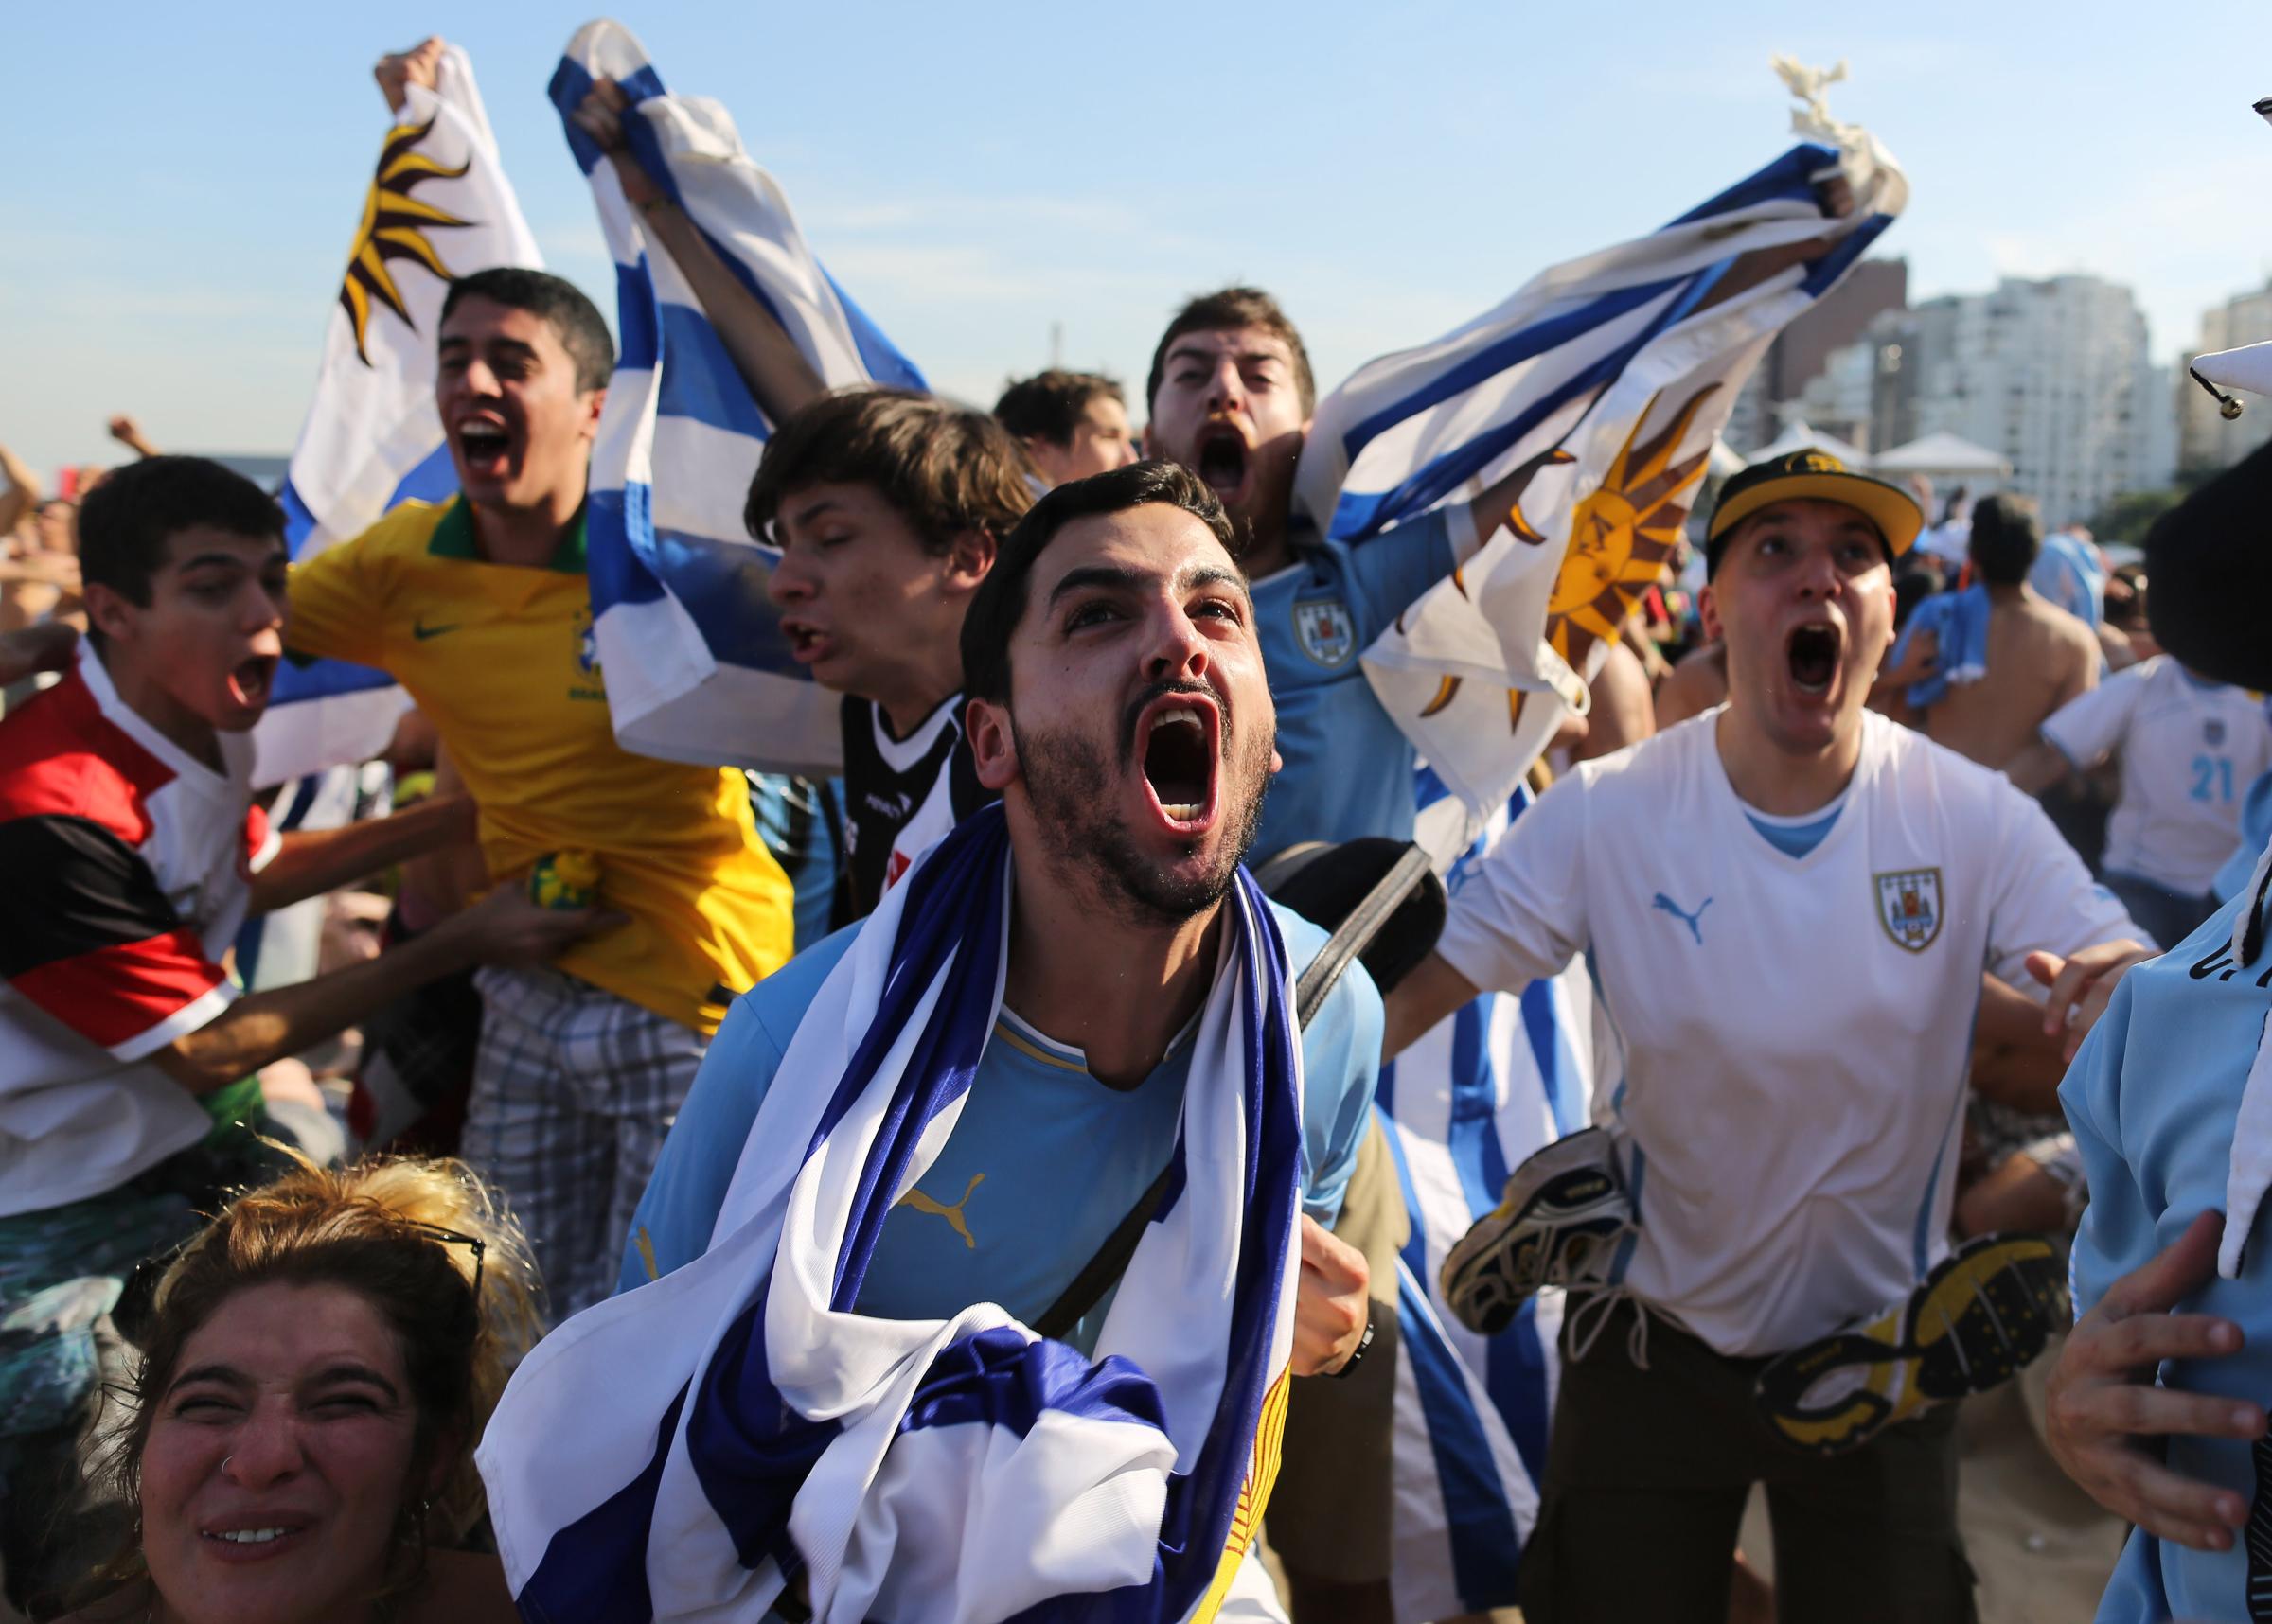 Uruguay soccer fans celebrate their team's goal against Italy as they watch the World Cup game on a live telecast inside the FIFA Fan Fest area on Copacabana beach in Rio de Janeiro on June 24, 2014.